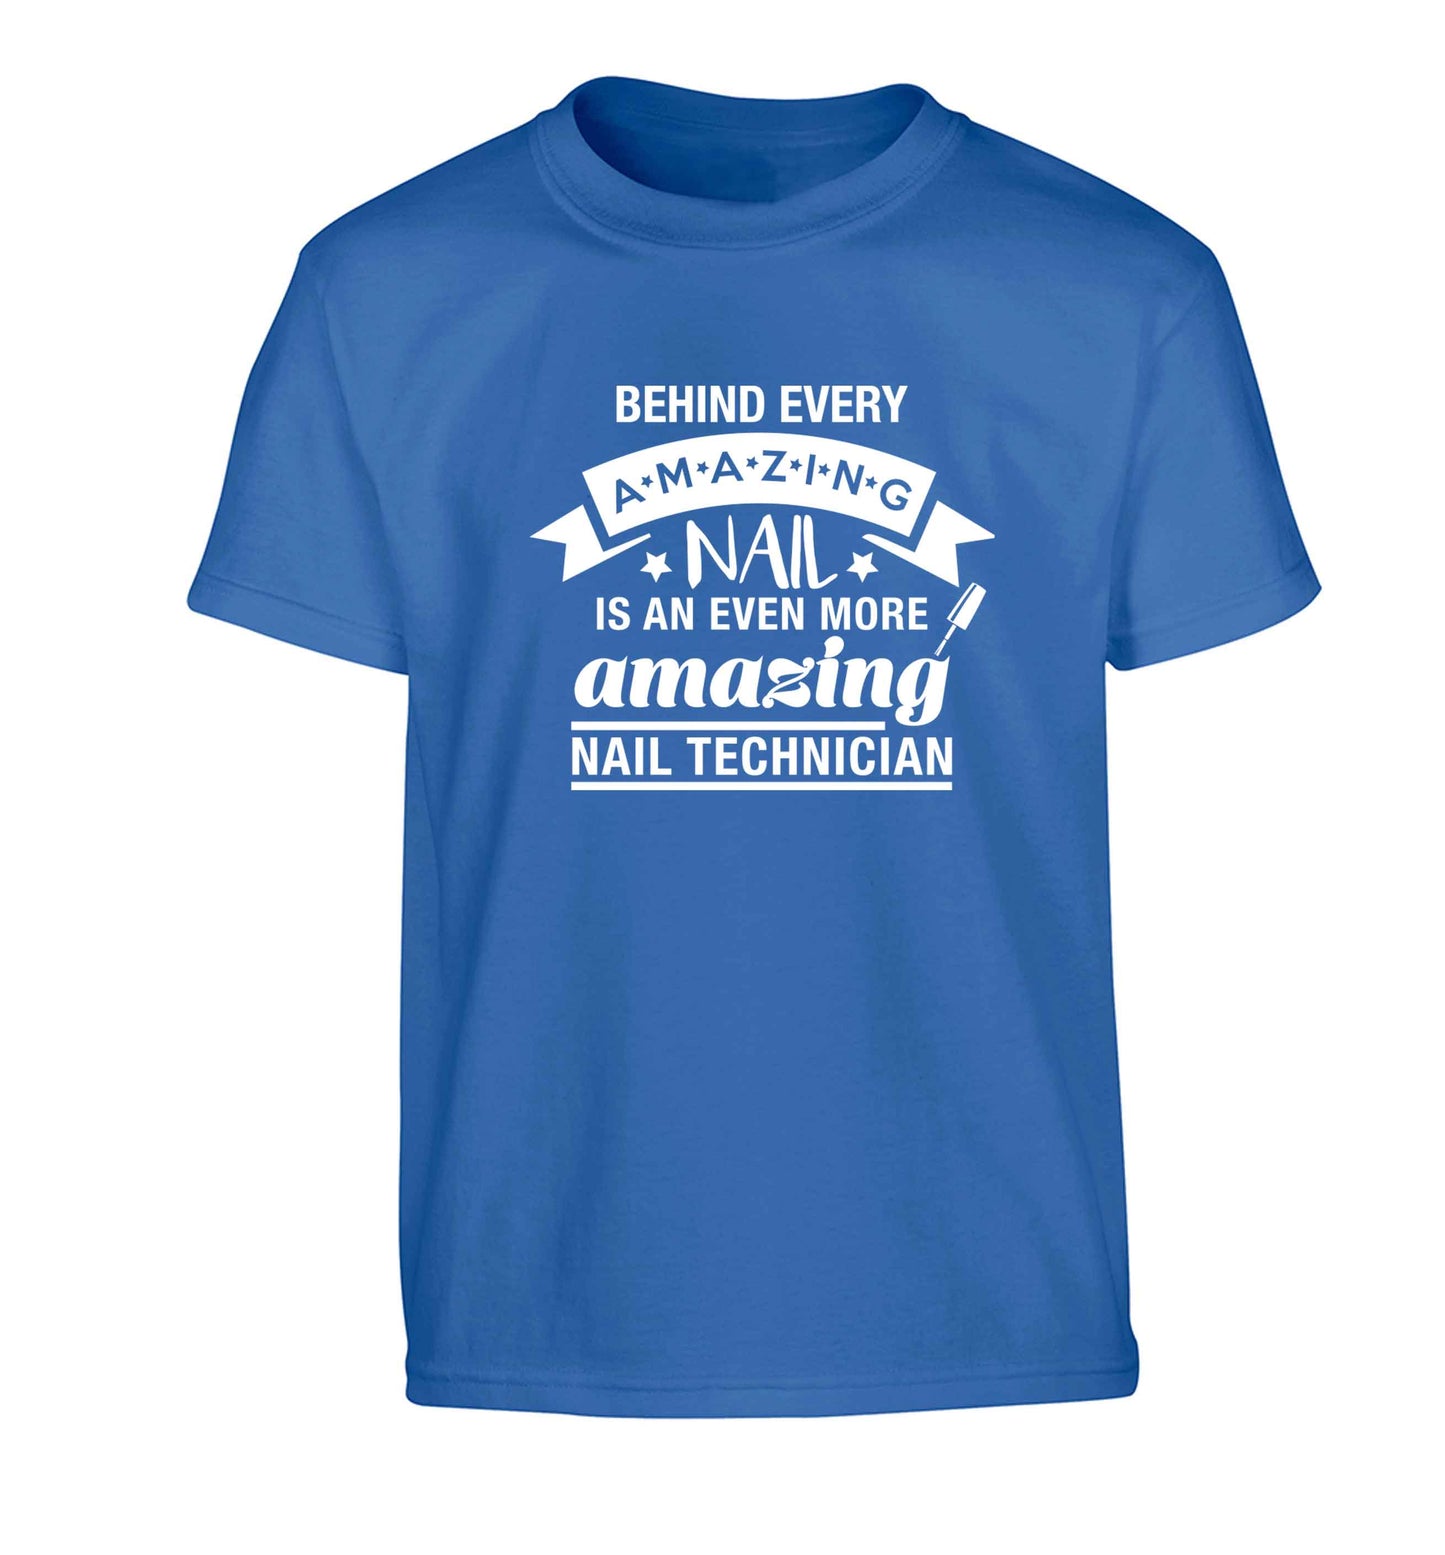 Behind every amazing nail is an even more amazing nail technician Children's blue Tshirt 12-13 Years